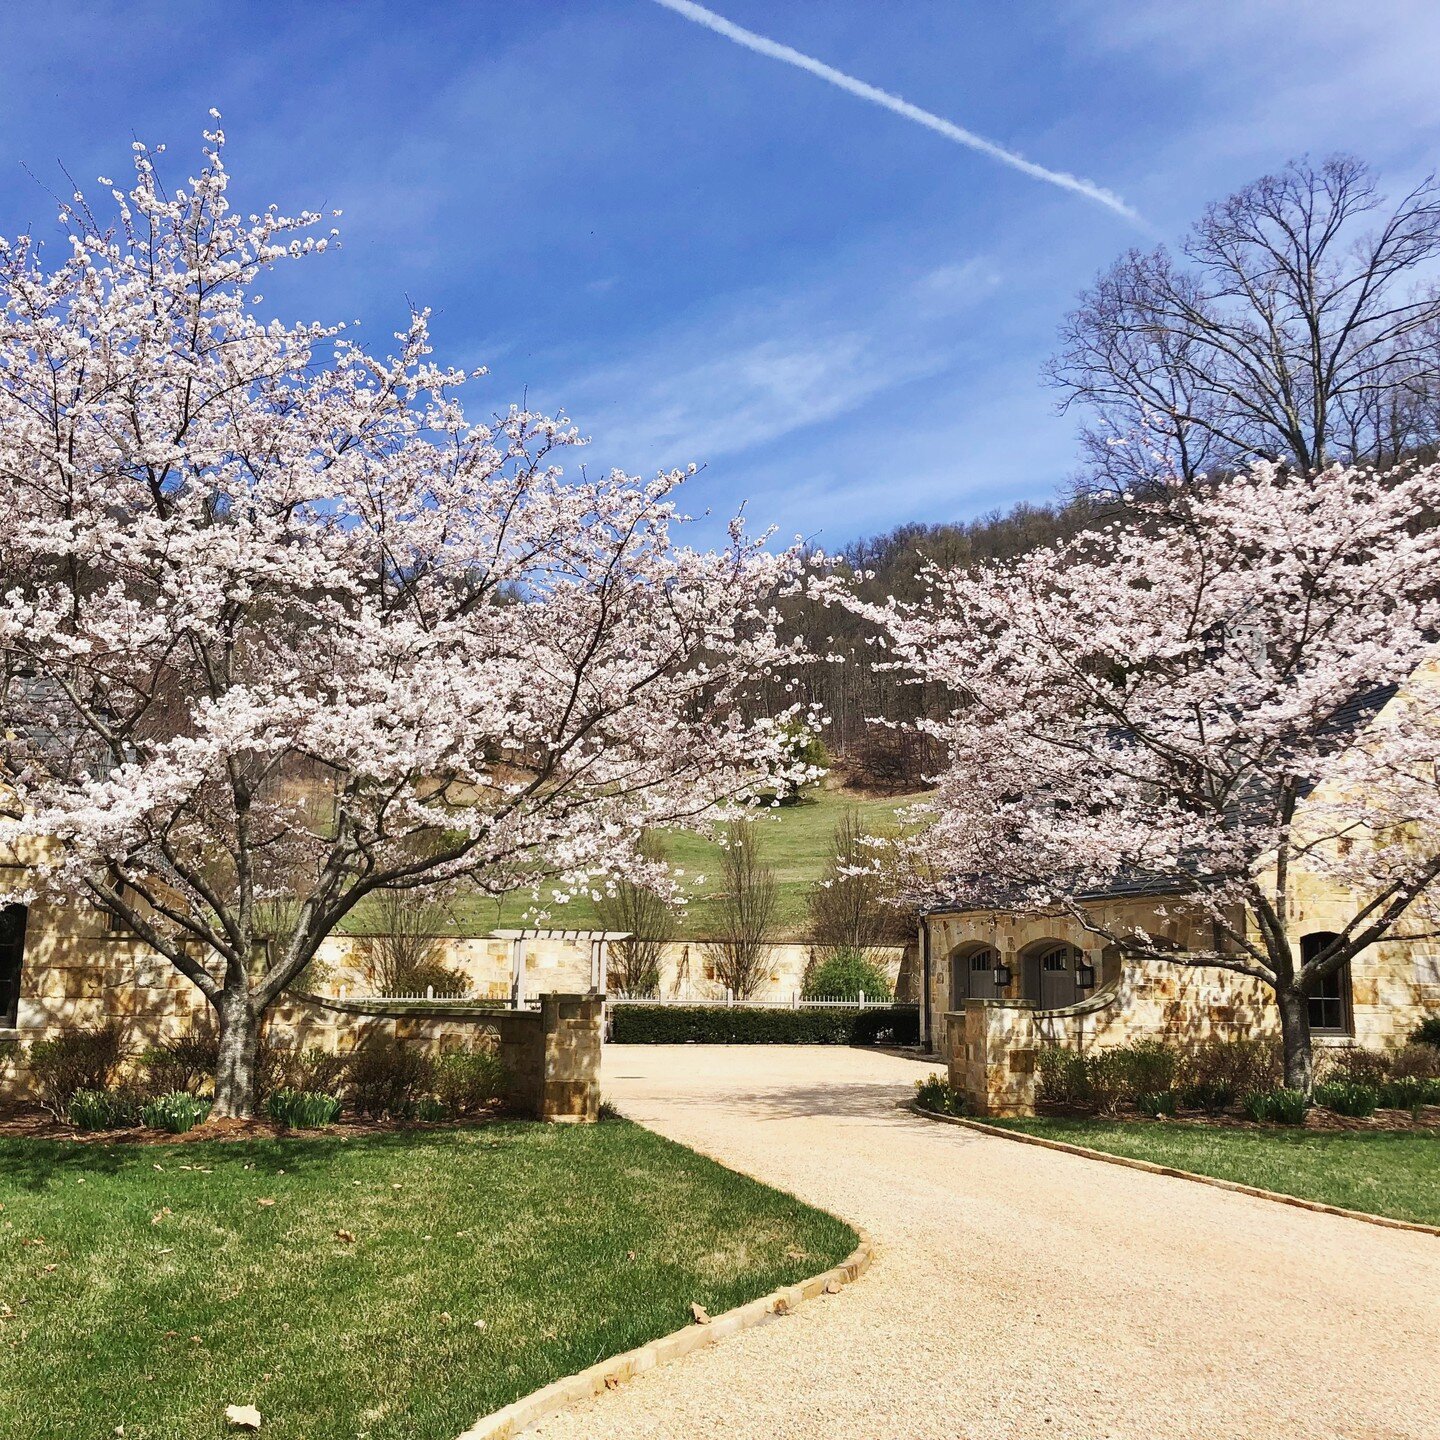 Cherry Blossoms have bloomed at Bramblewood Estate 😍 #virginia #cherryblossom #spring #luxuryhomes #vacationrental